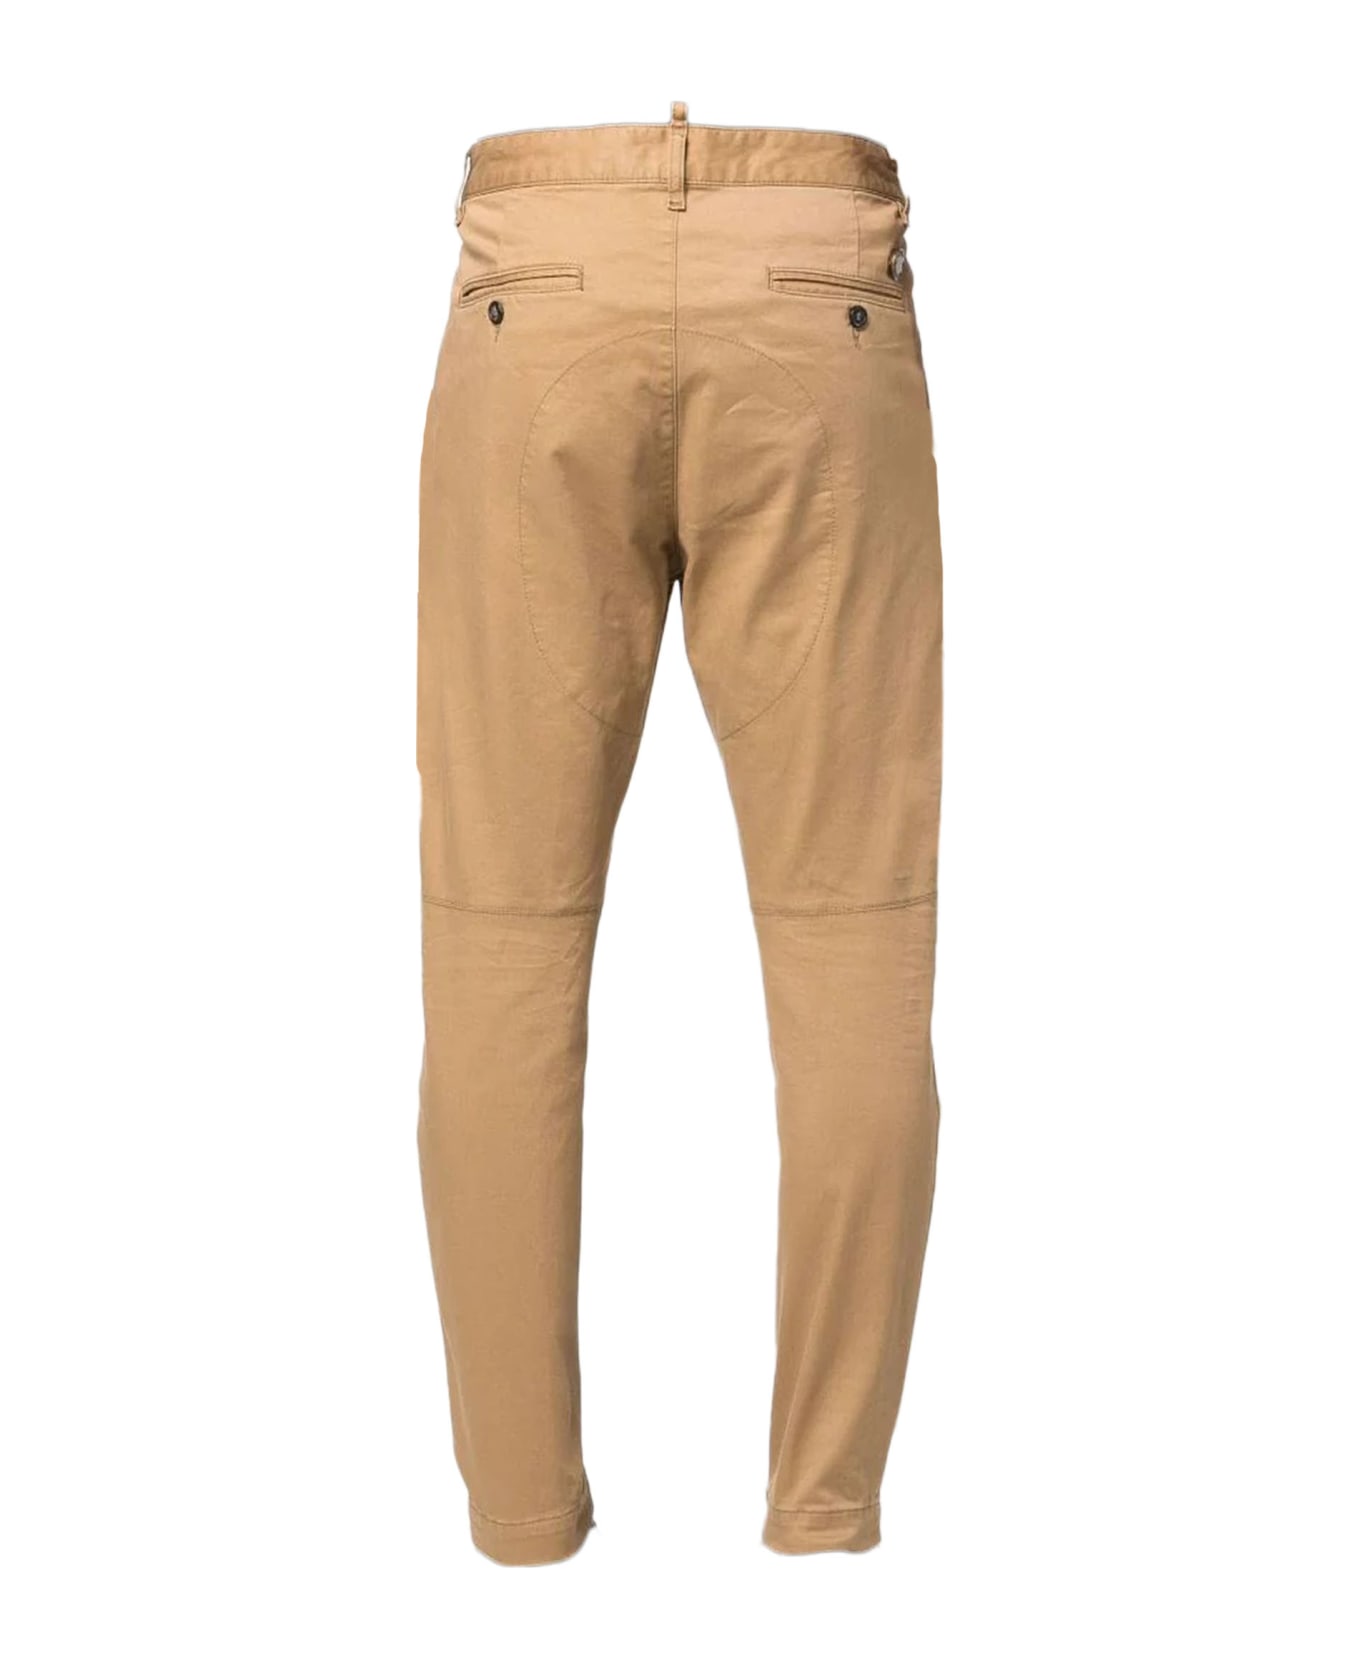 Dsquared2 Beige Cotton Trousers - Beige ボトムス